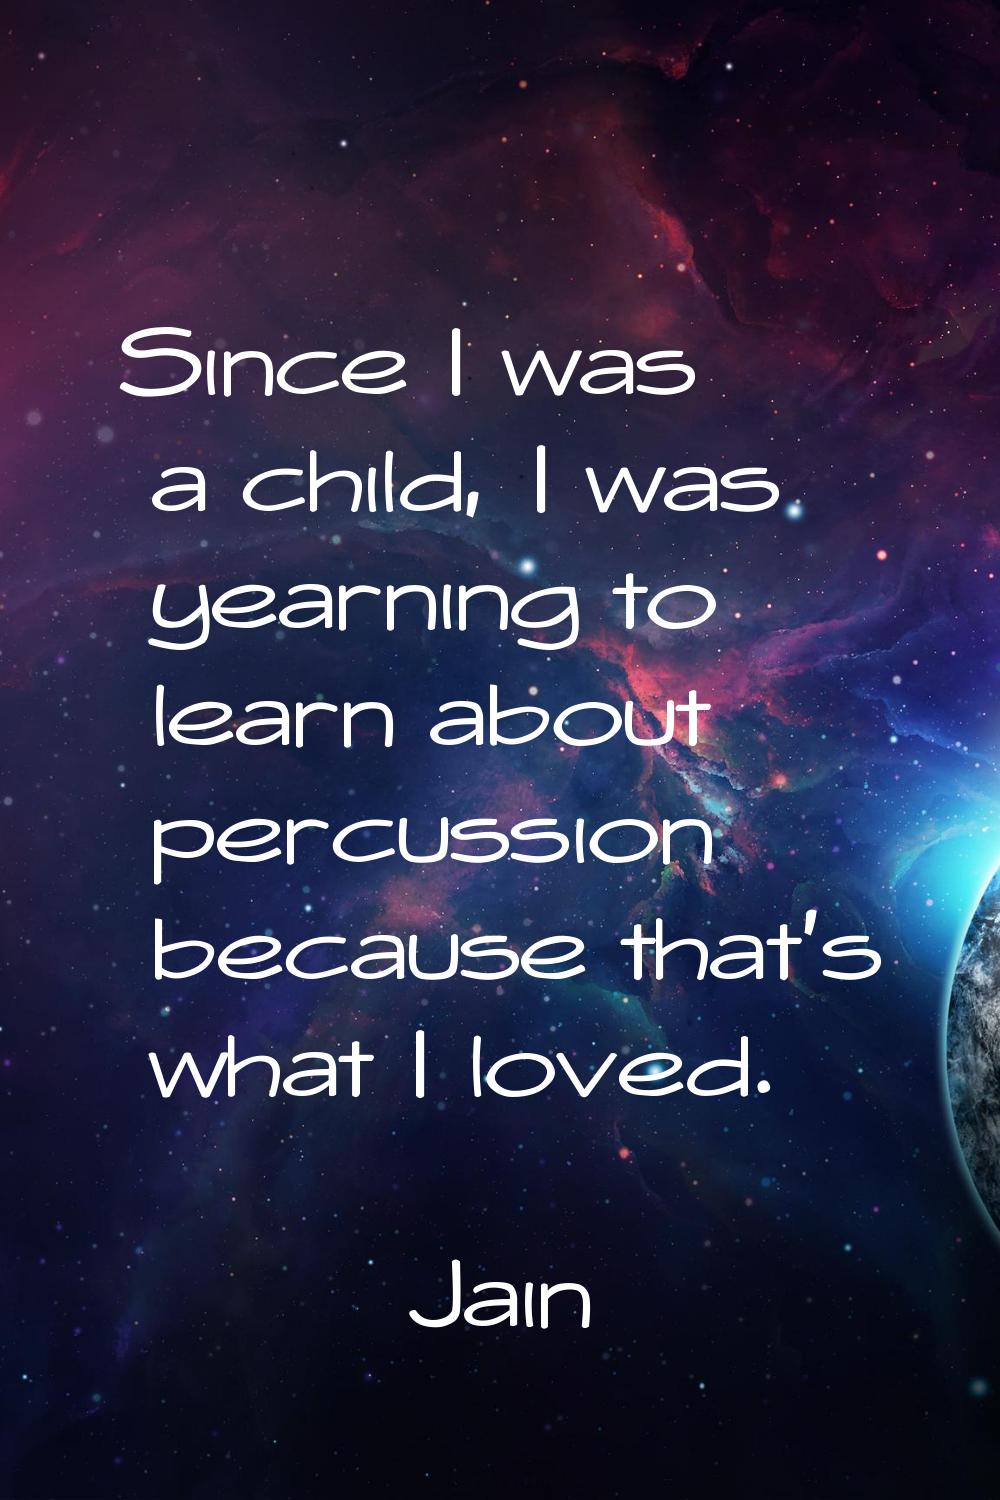 Since I was a child, I was yearning to learn about percussion because that's what I loved.